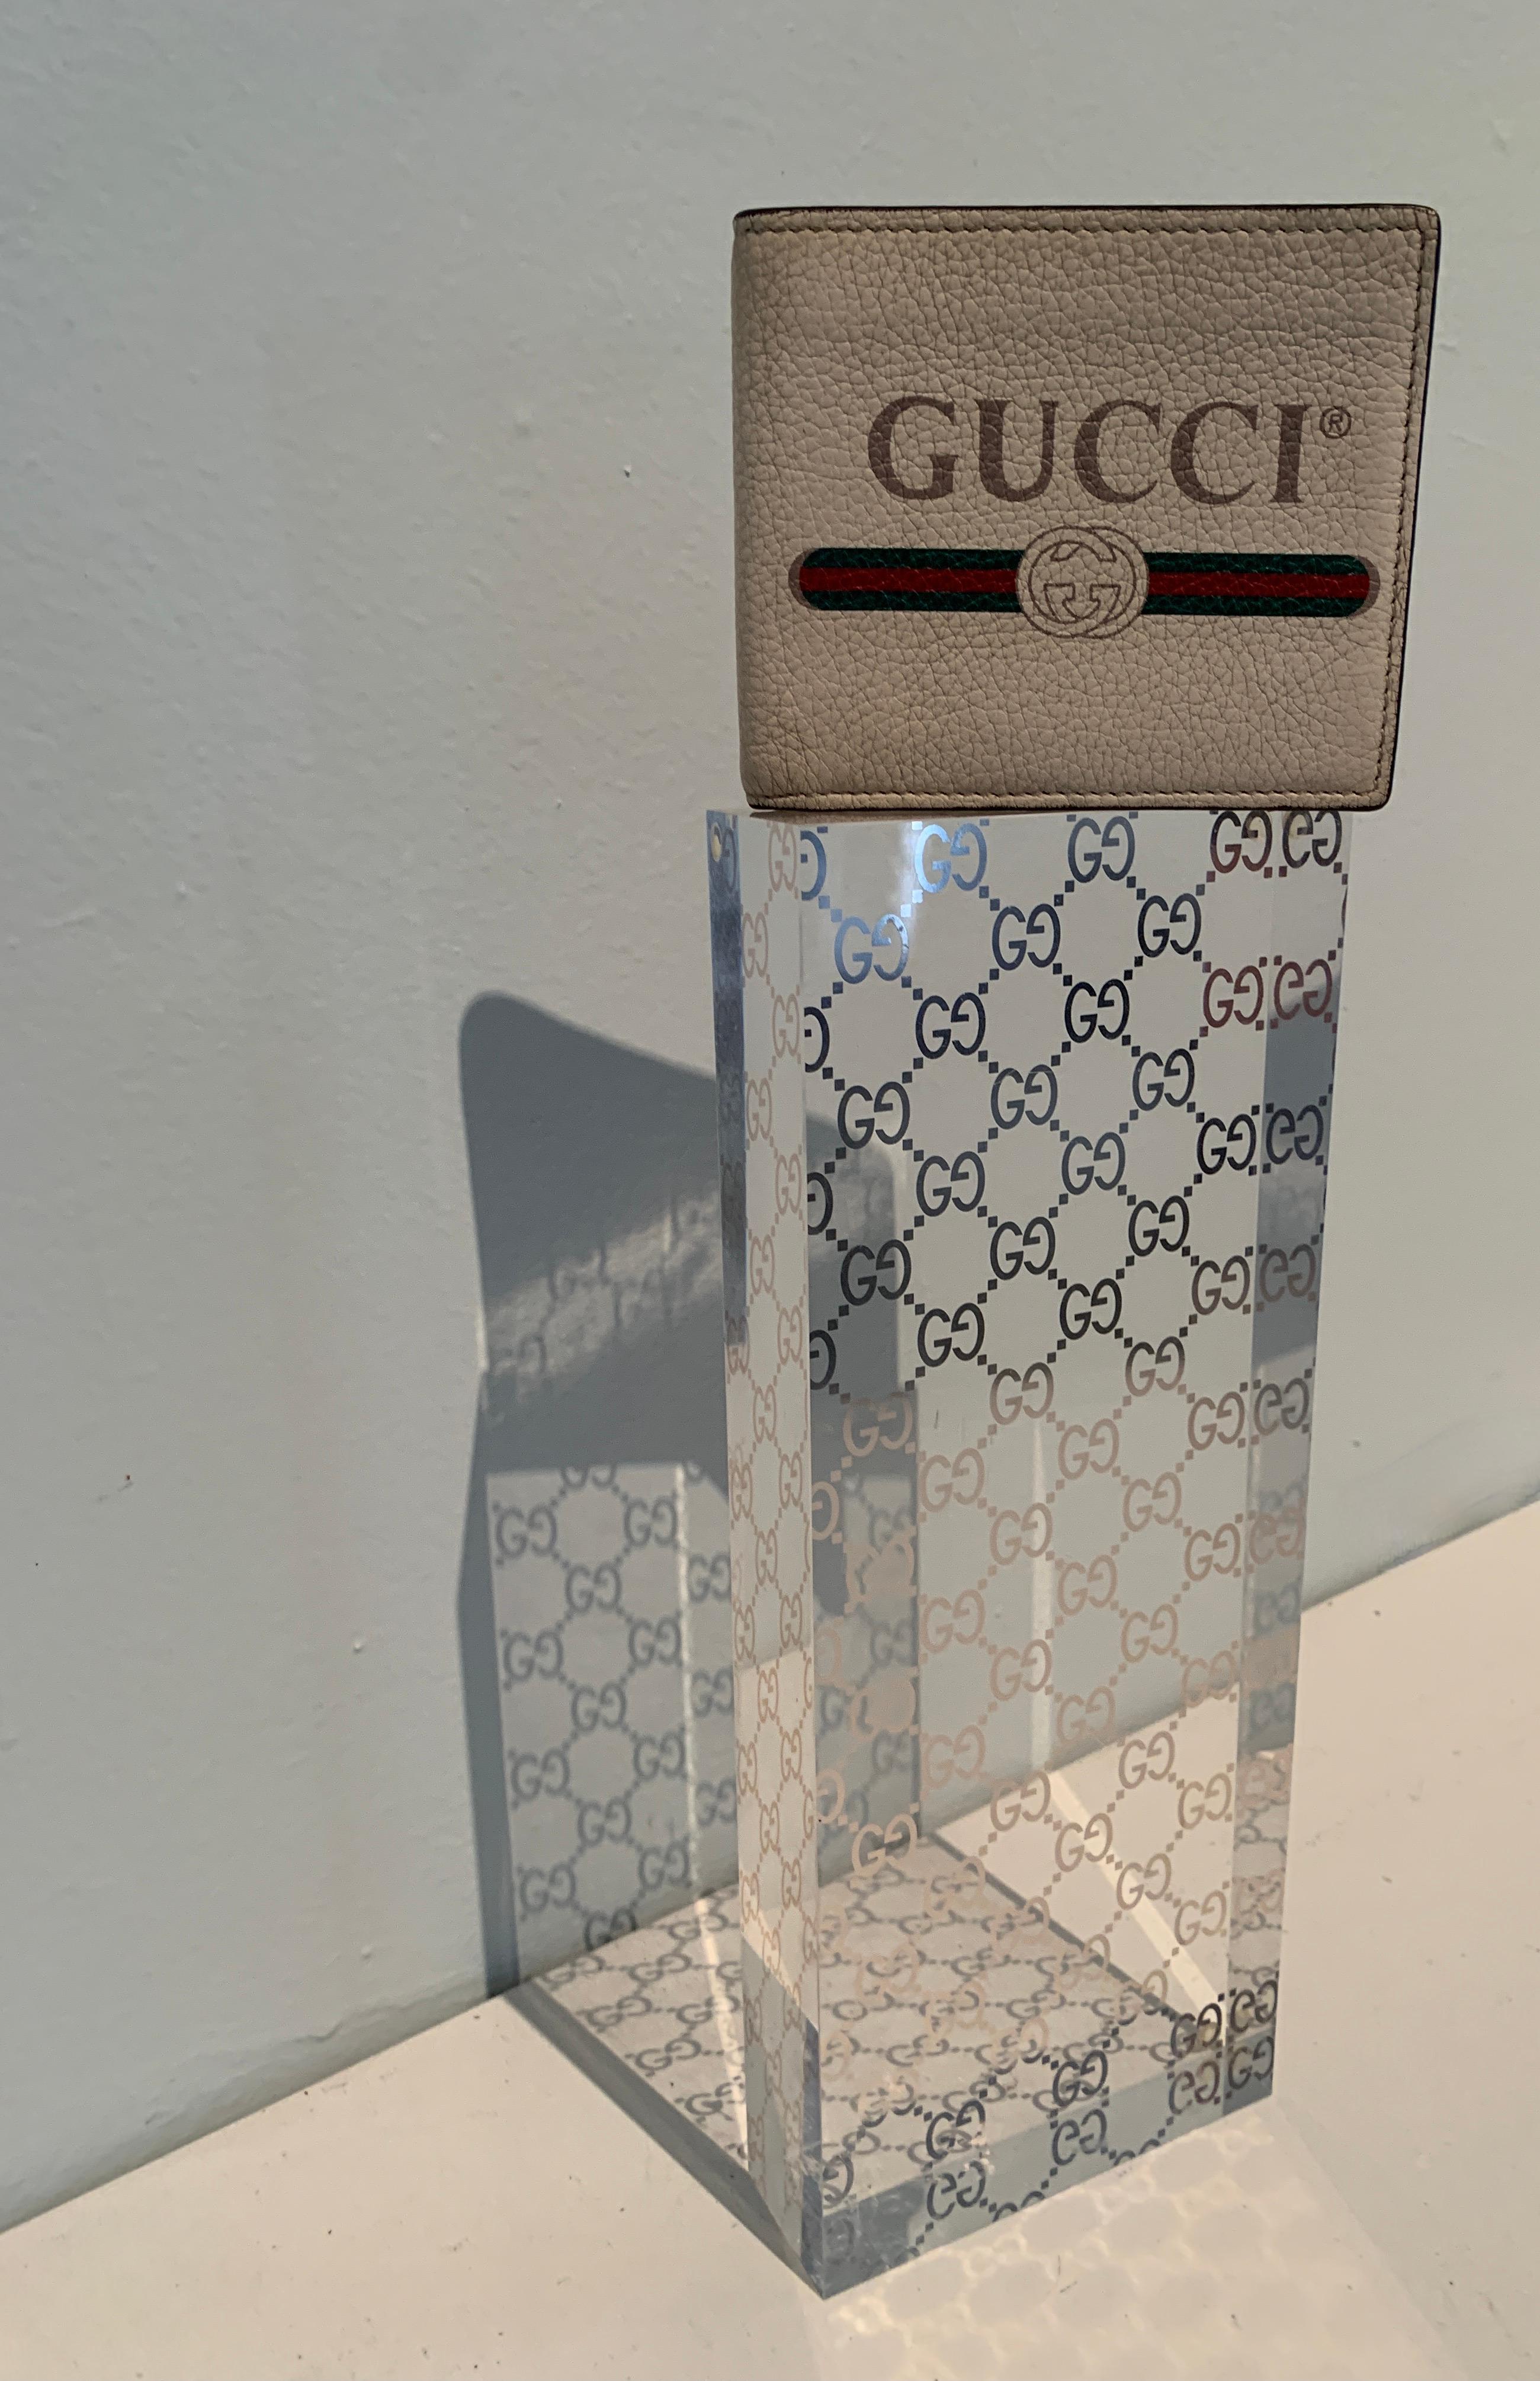 A Gucci piece to display or rest your wallet or other accessories on. The vintage piece with Logo in foil is a great item to add to your valet or dressing area... or in the main room on a coffee table as a sculpture or stand. This is sure to be a